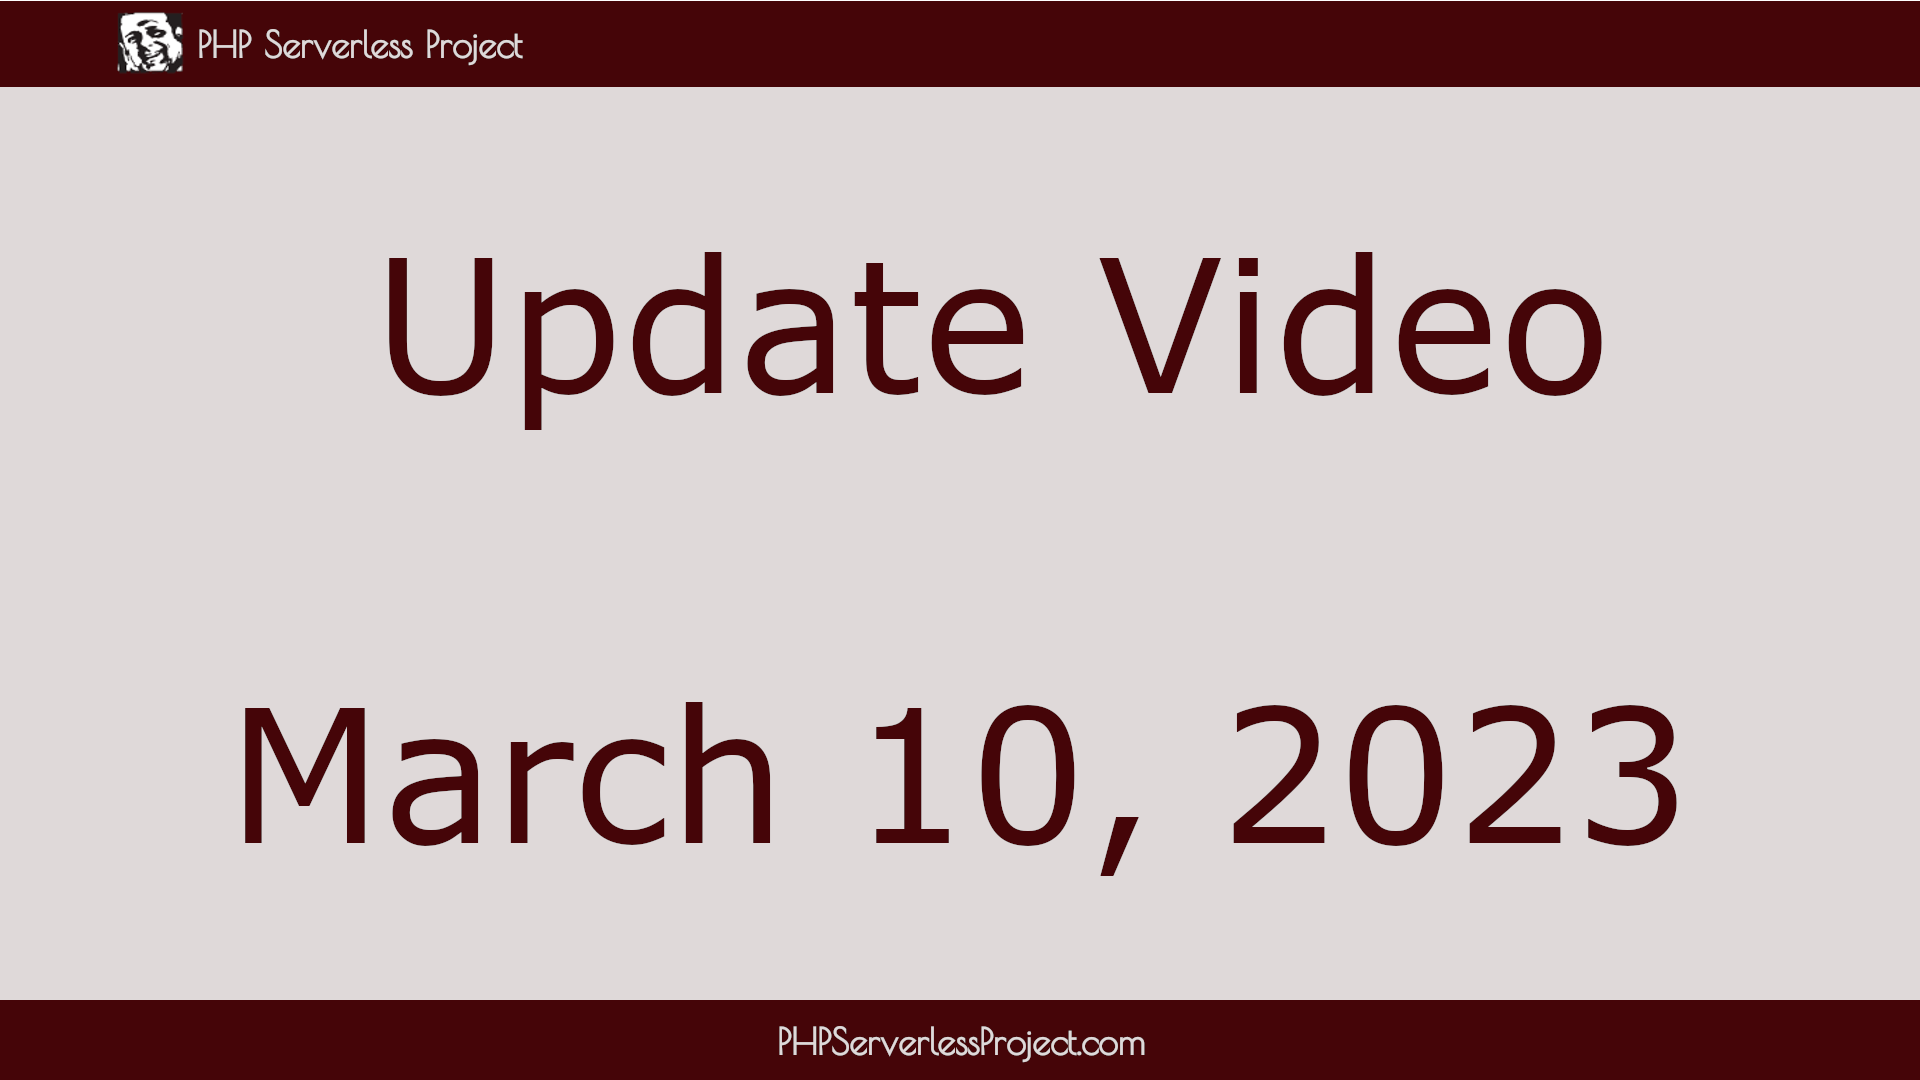 Project Update, March 10, 2023